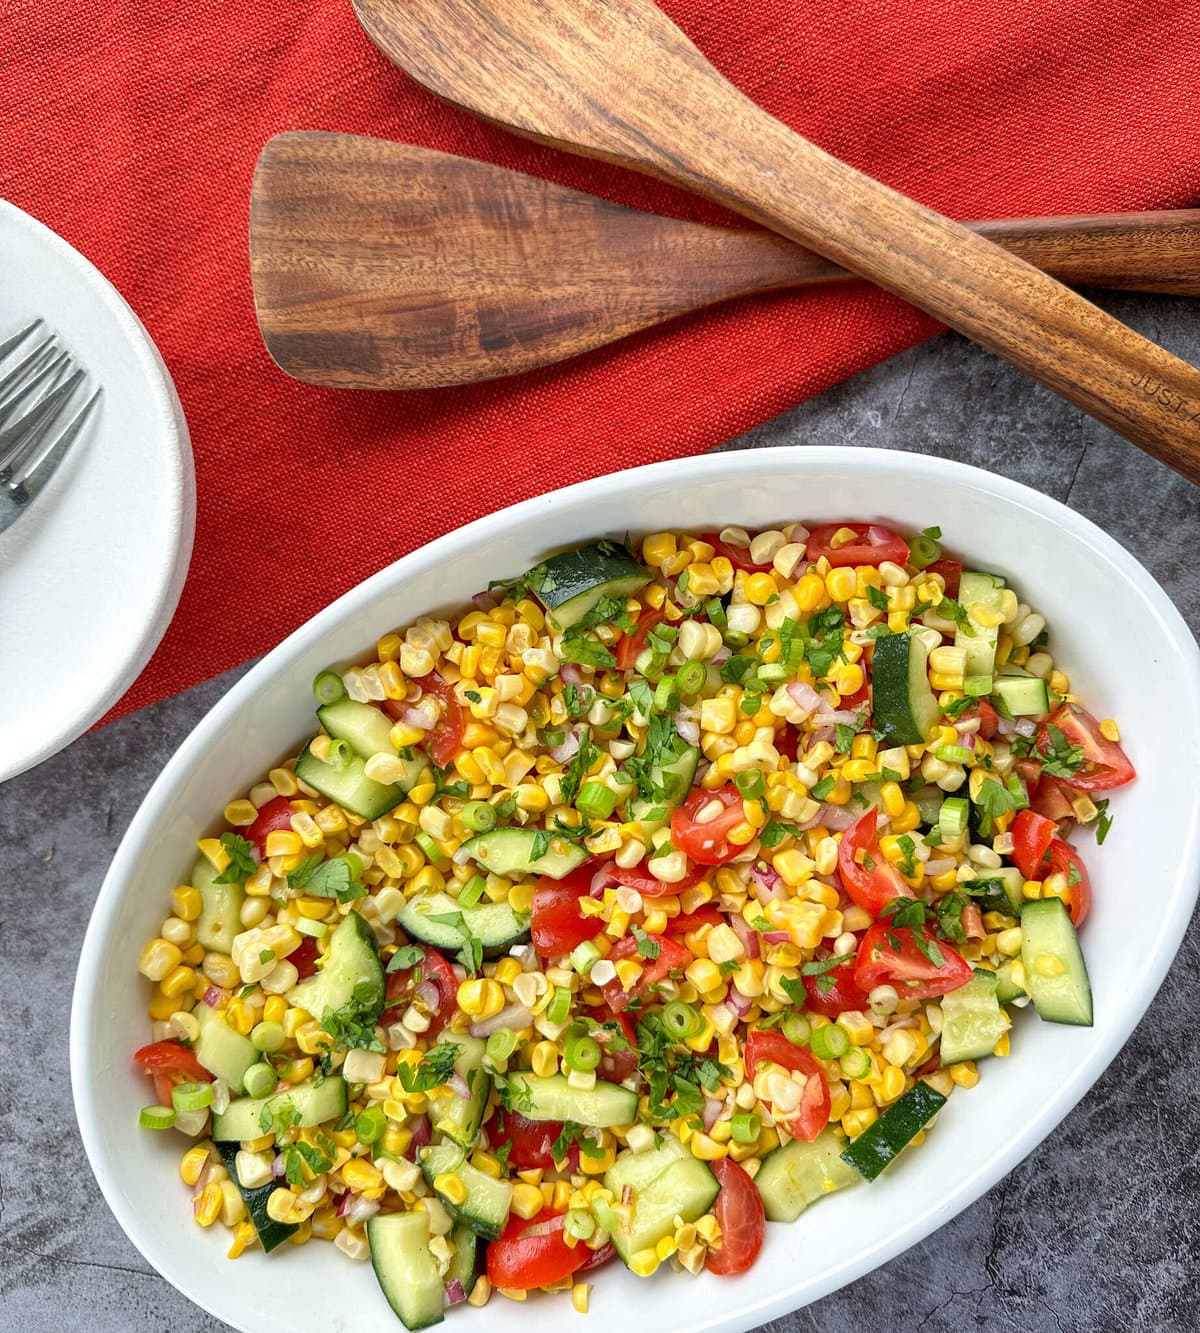 Sweetcorn Salad in a large white bowl with wooden salad utensils 